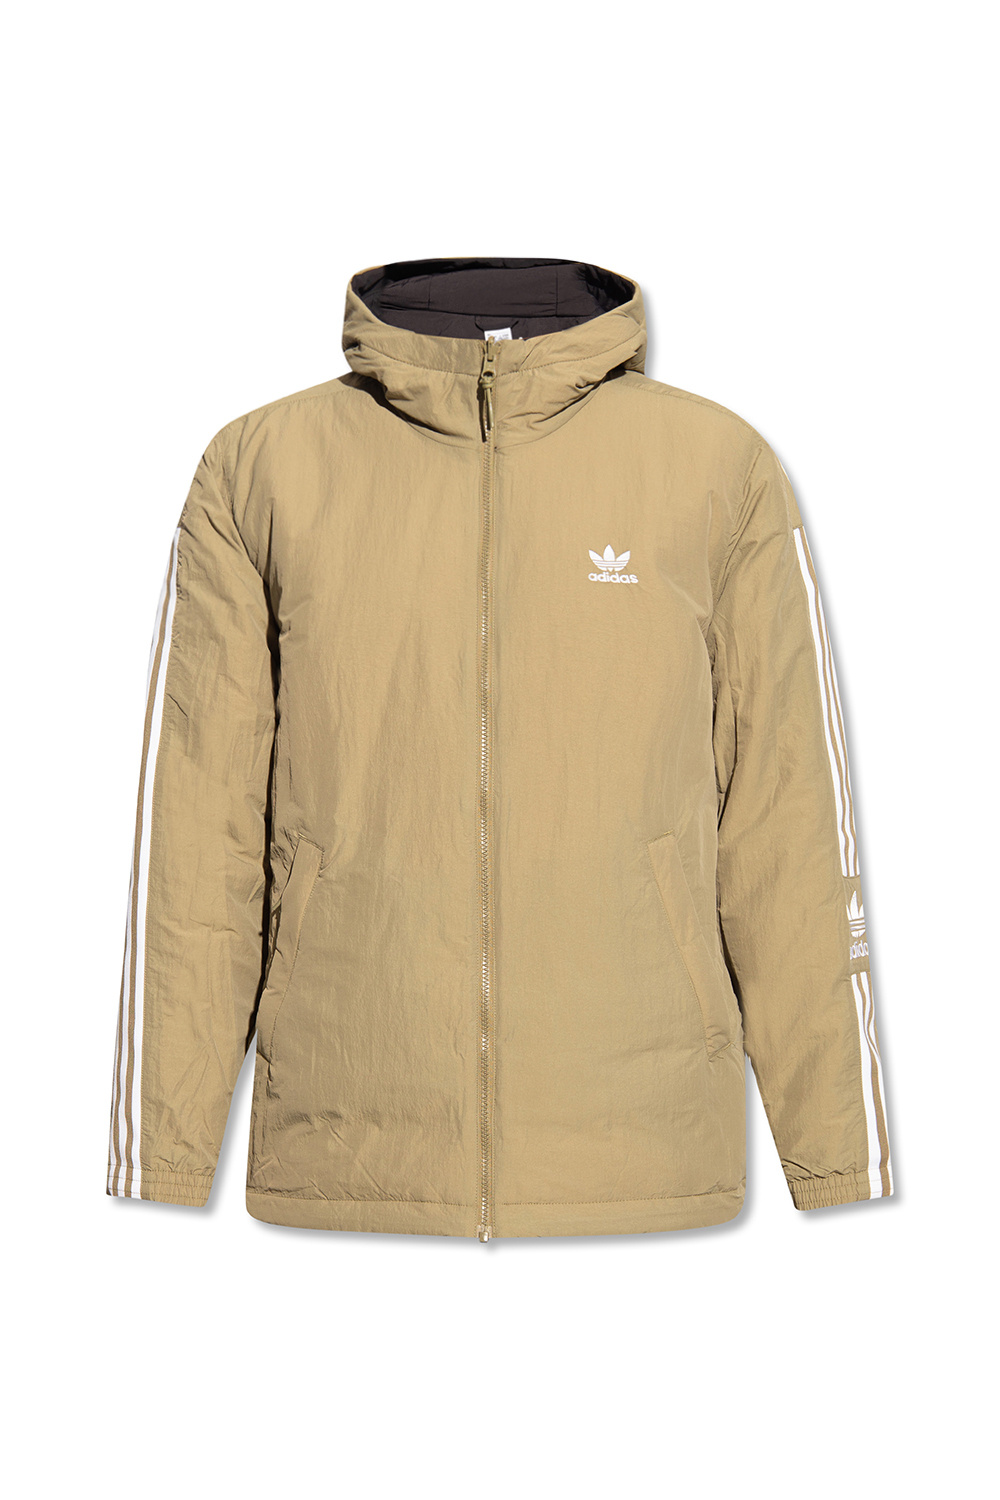 Parque jurásico Compadecerse galope united arrows and sons for adidas samba shoes girls - Green Reversible  jacket with originals for ADIDAS Originals - IetpShops GB